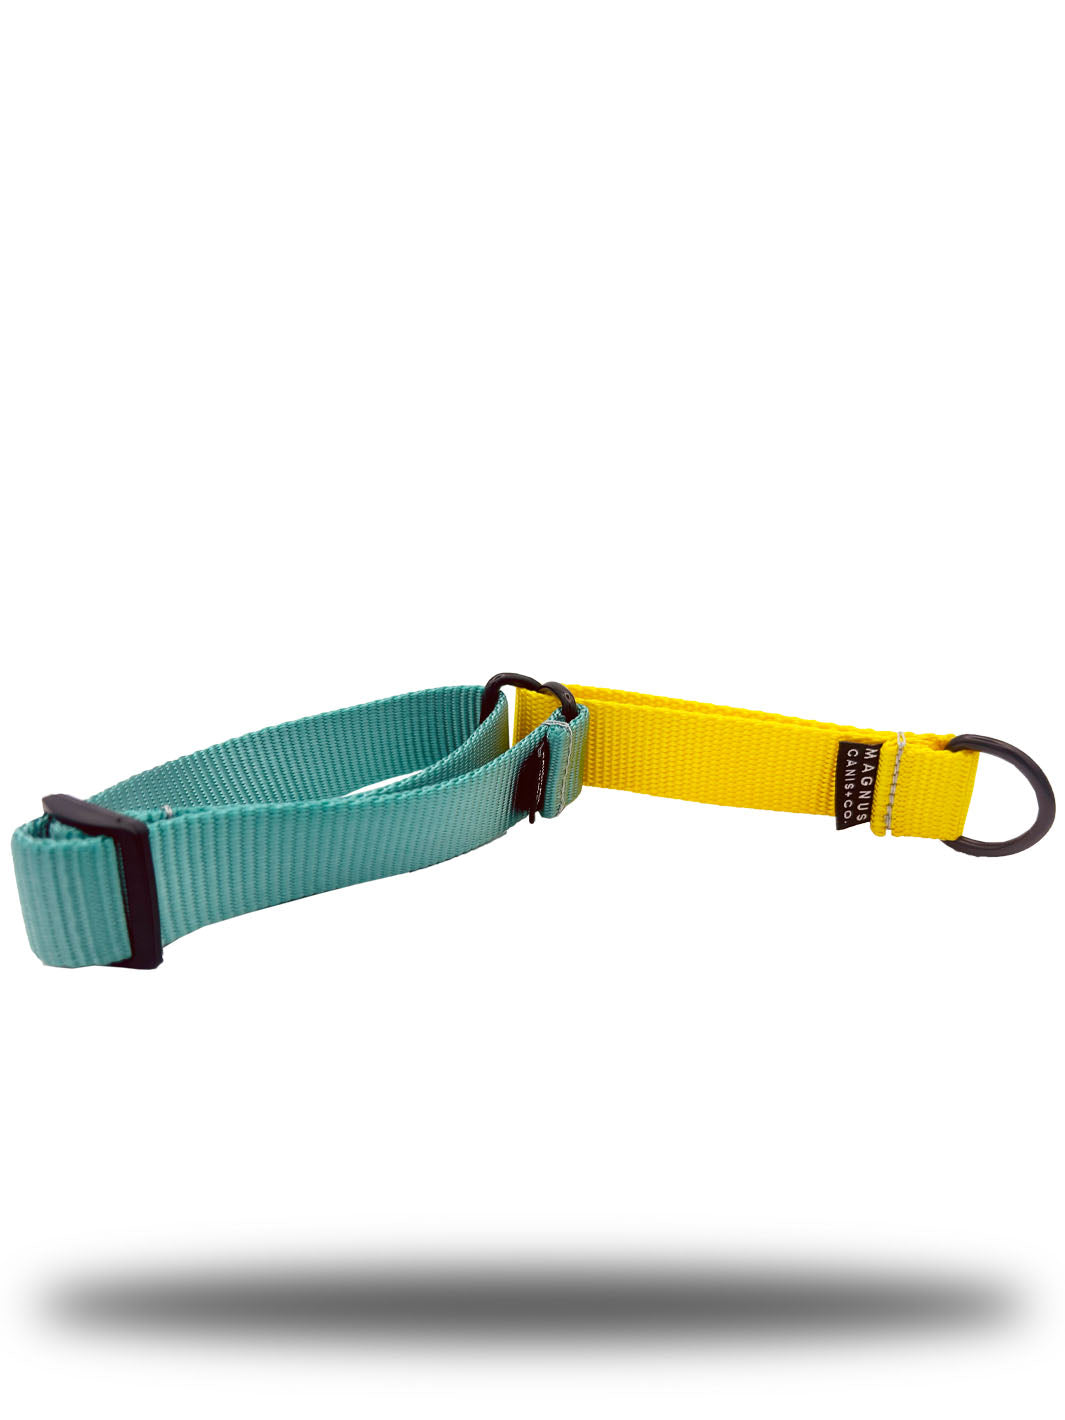 MAGNUS Canis martingale dog collar in light teal and yellow nylon webbing strap.